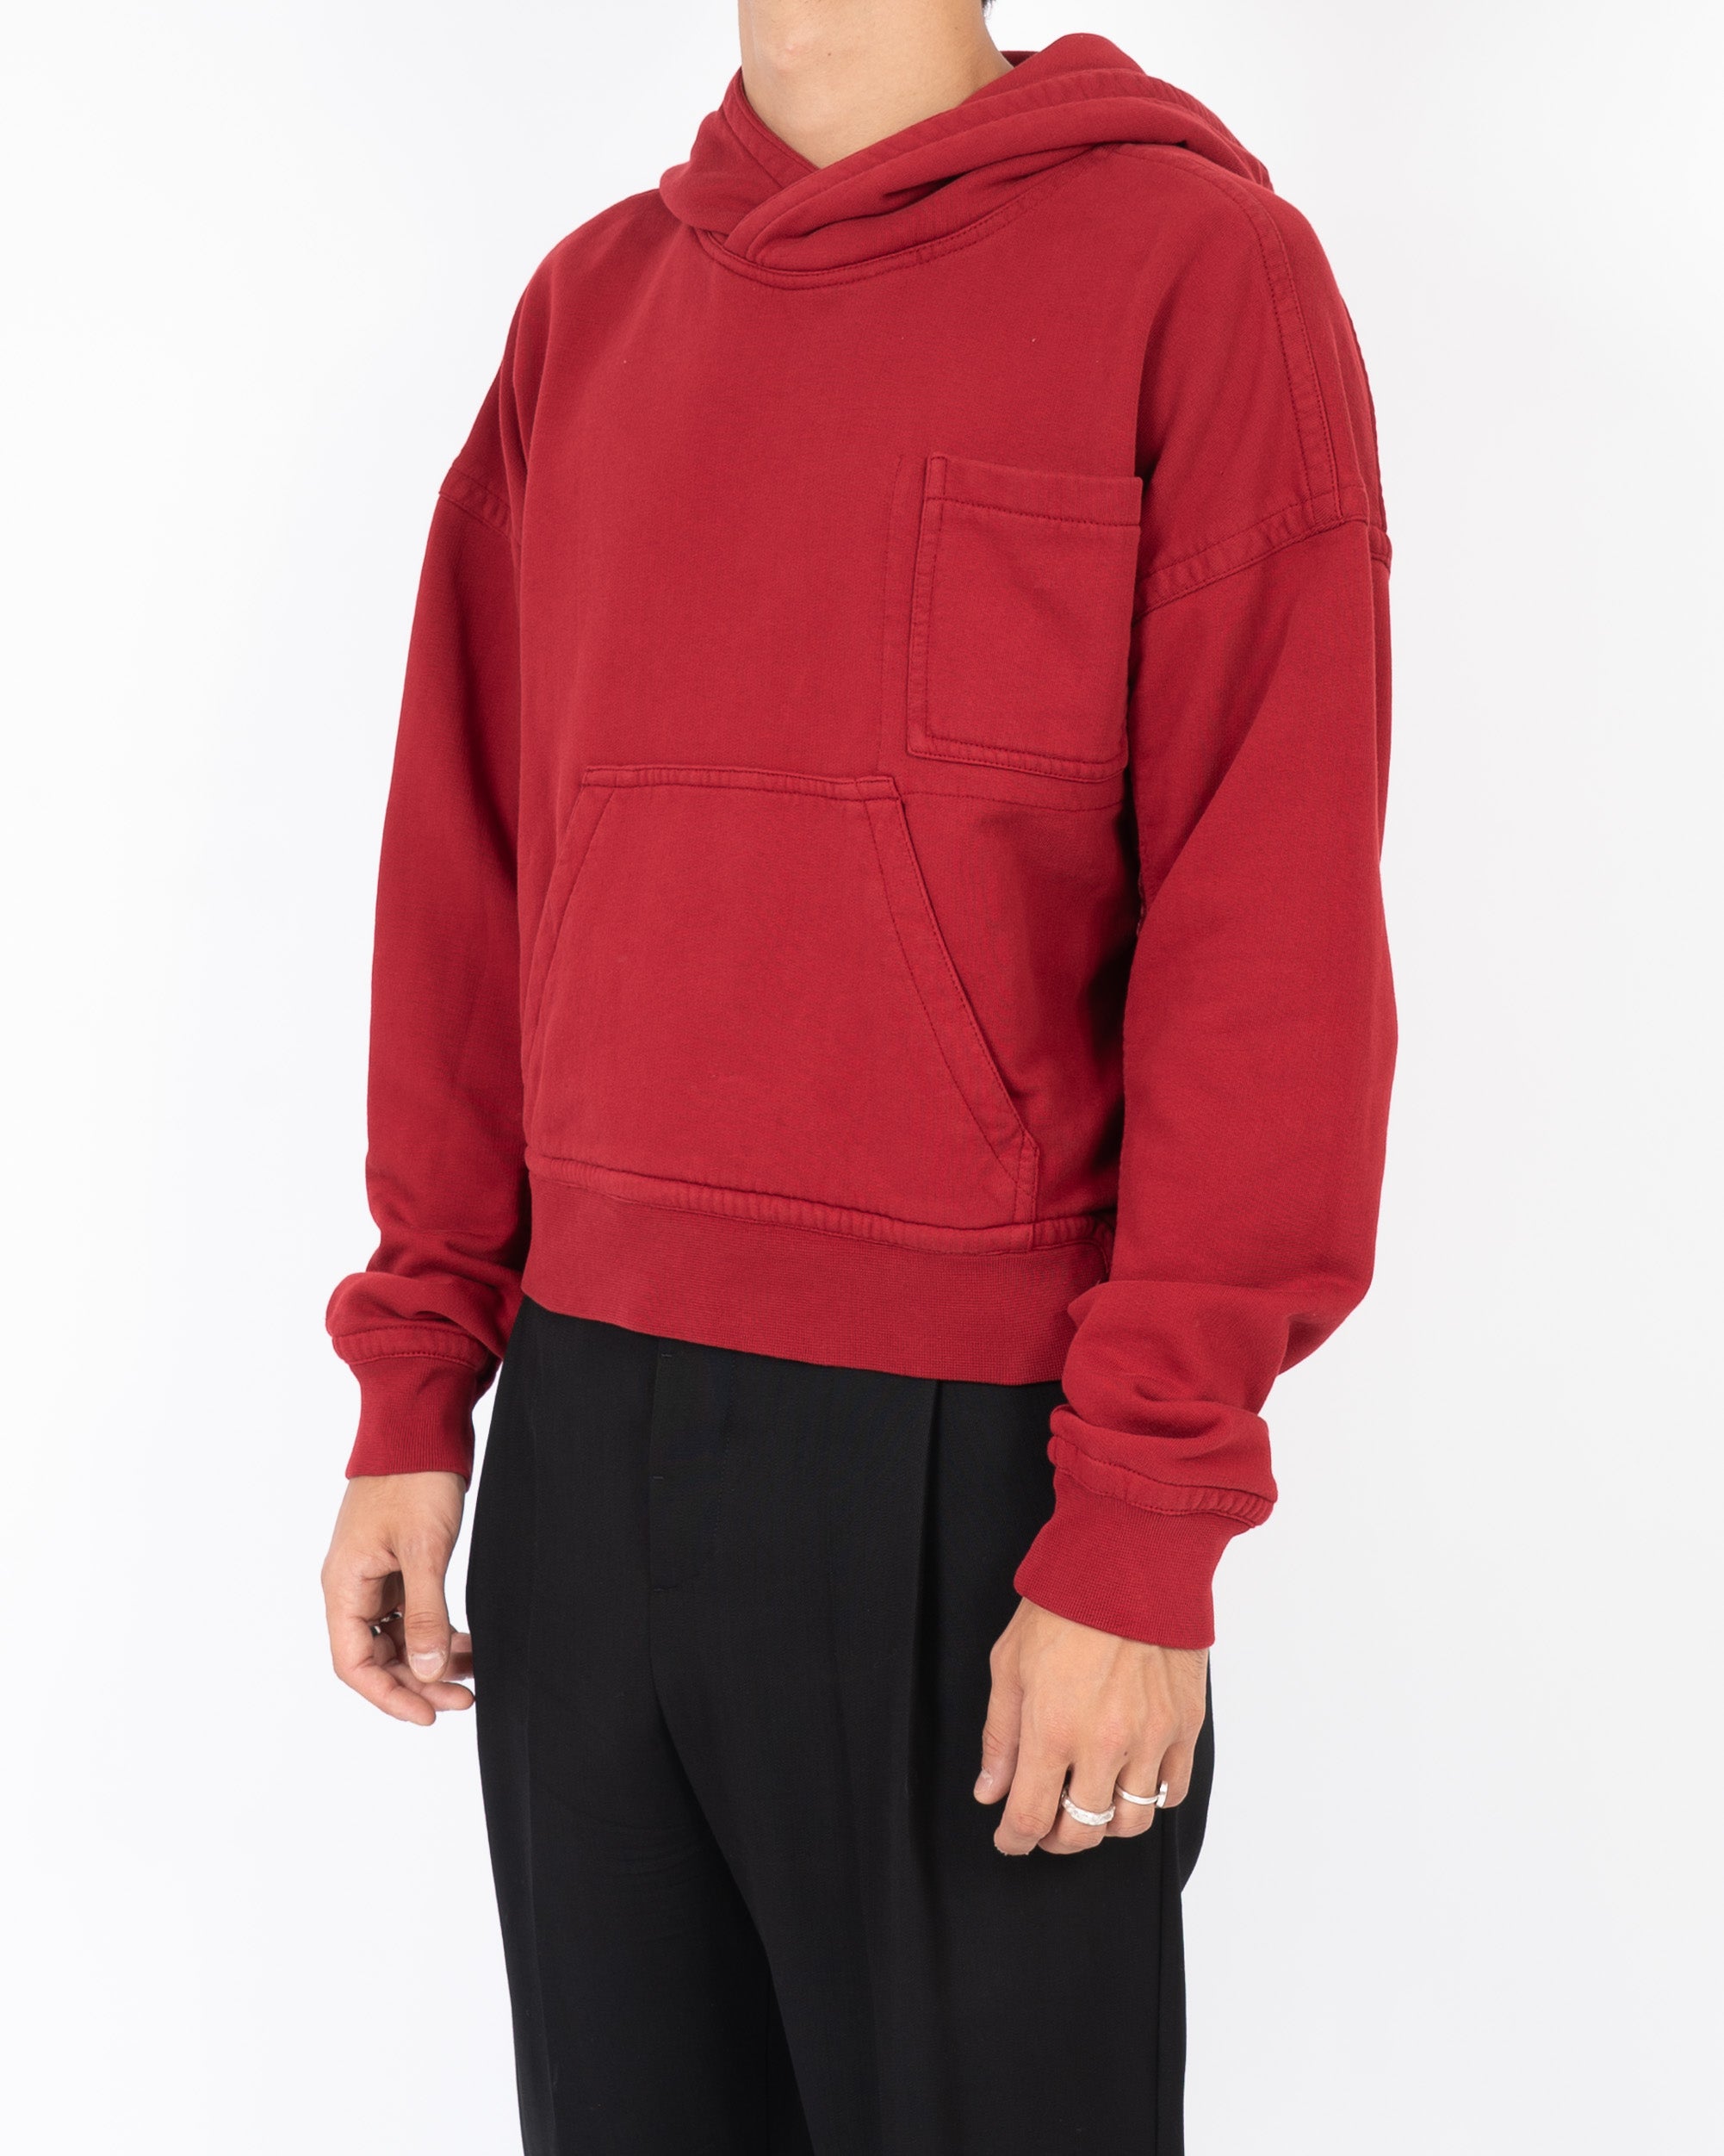 FW17 Red Panelled Perth Hoodie